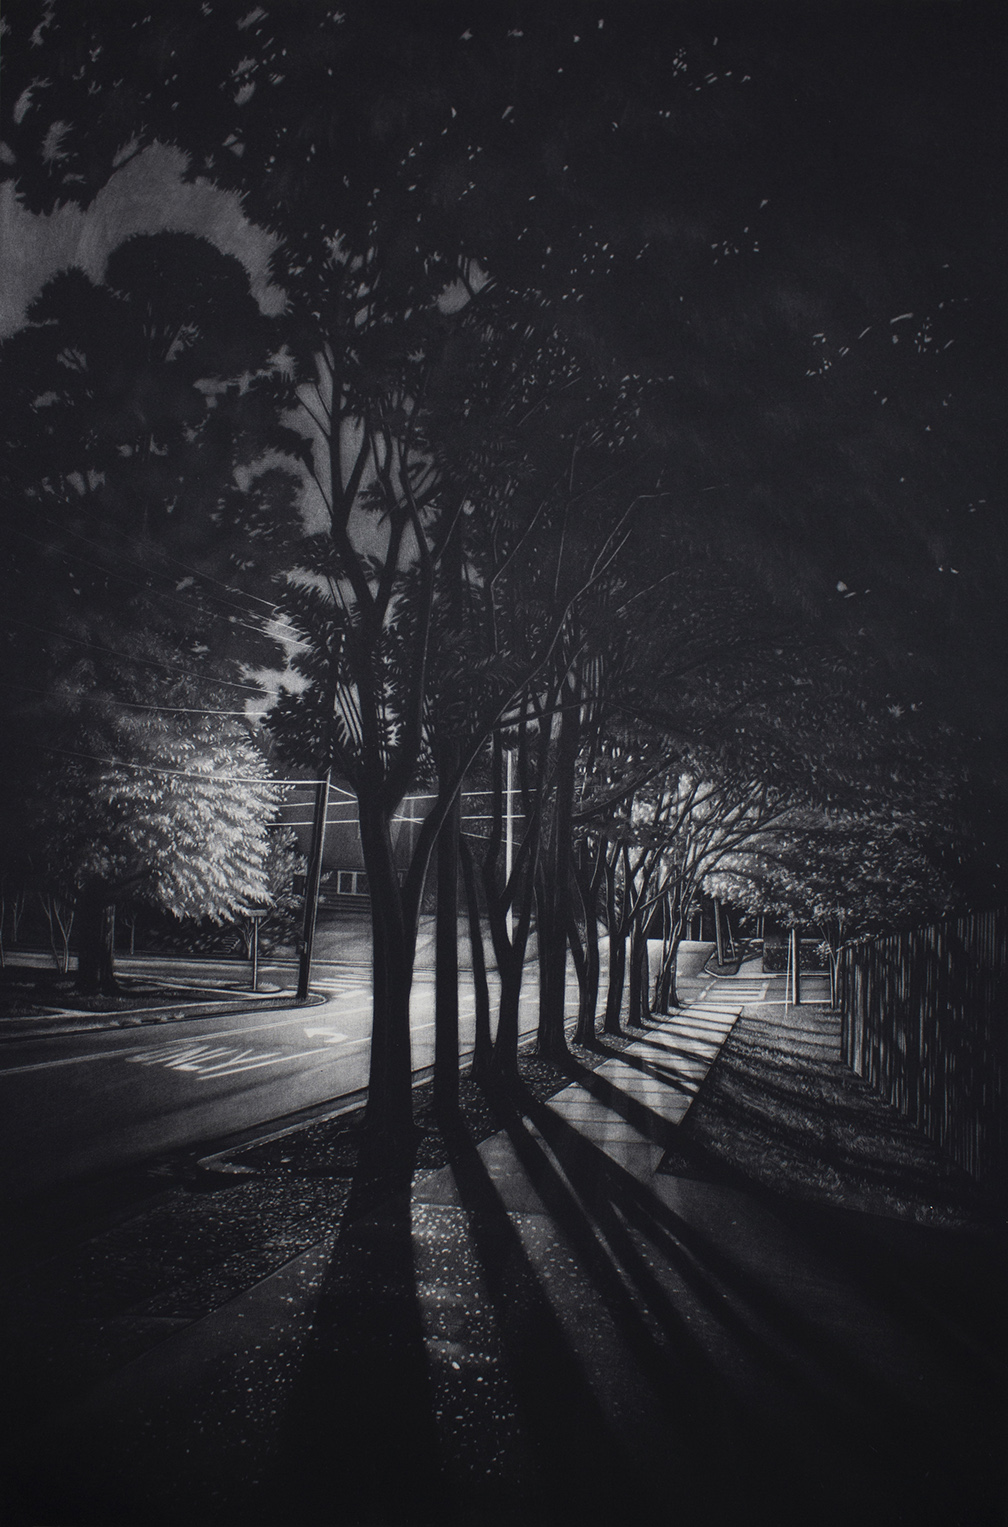 Black and white image of night scene with trees.